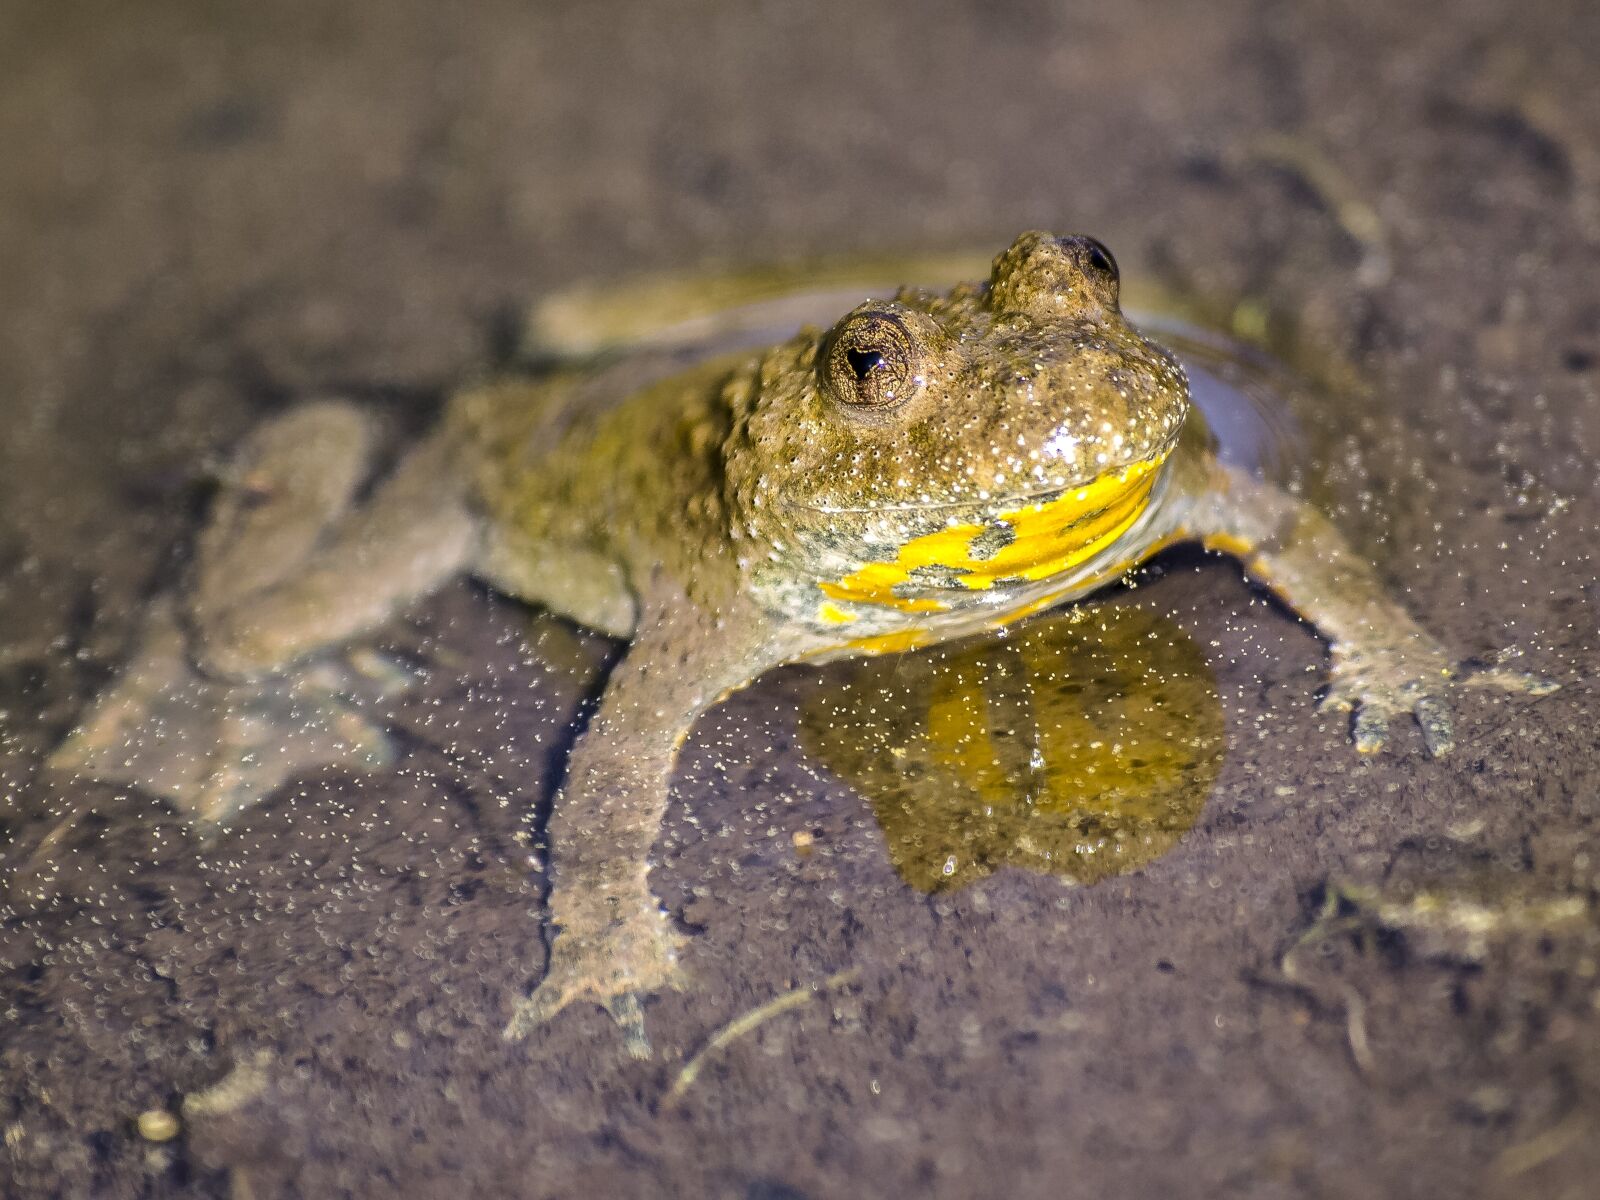 Olympus E-5 sample photo. Yellow-bellied toad, toad, amphibians photography